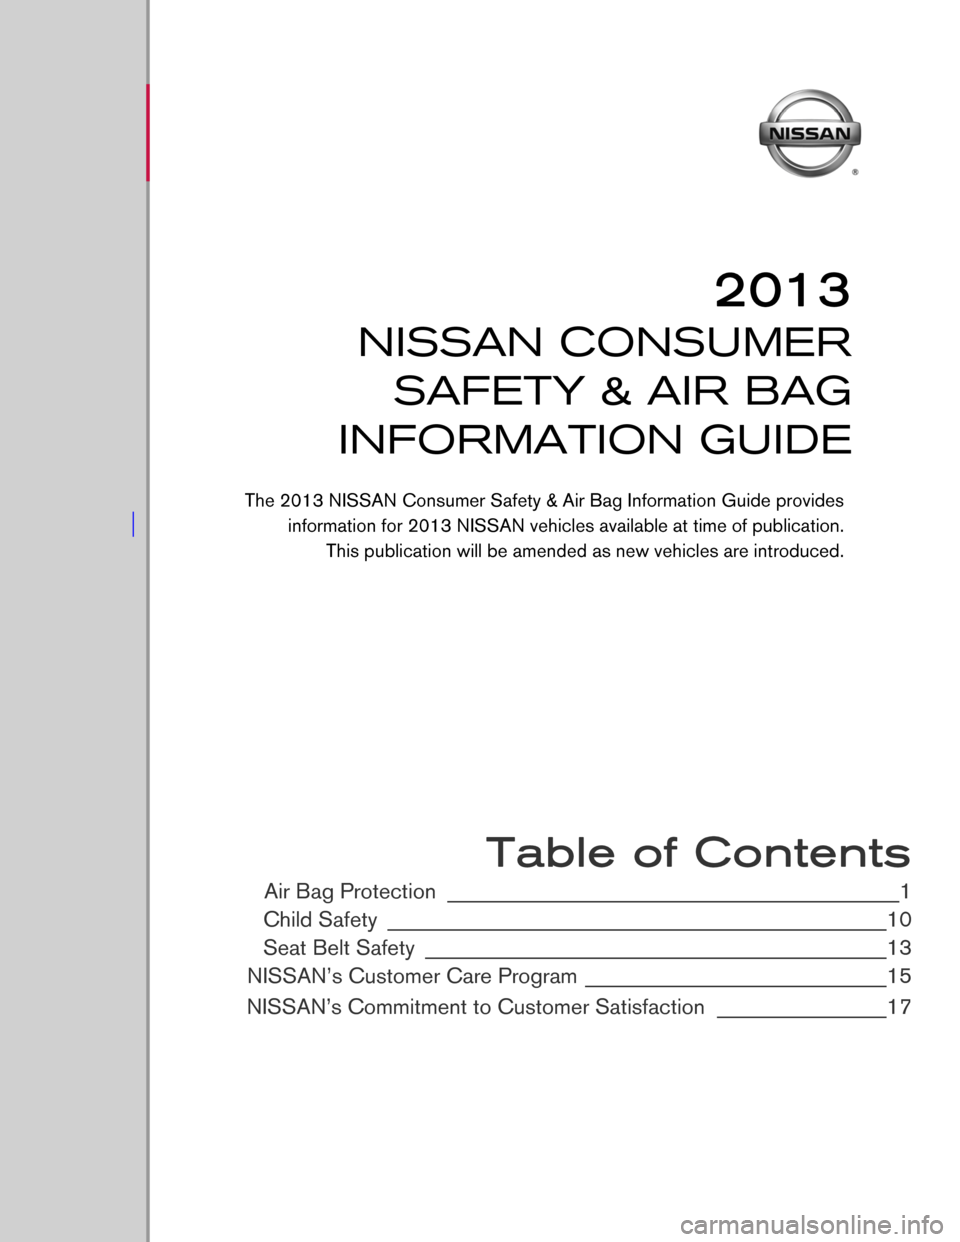 NISSAN ALTIMA 2013 L33 / 5.G Consumer Safety Air Bag Information Guide  
 
 
 
 
 
 
 
 
 
 
 
 
 
 
 
 
 
 
 
 
 
 
 Table of Contents
Air Bag Protection ________________________________________________1
Child Safety
 ____________________________________________________